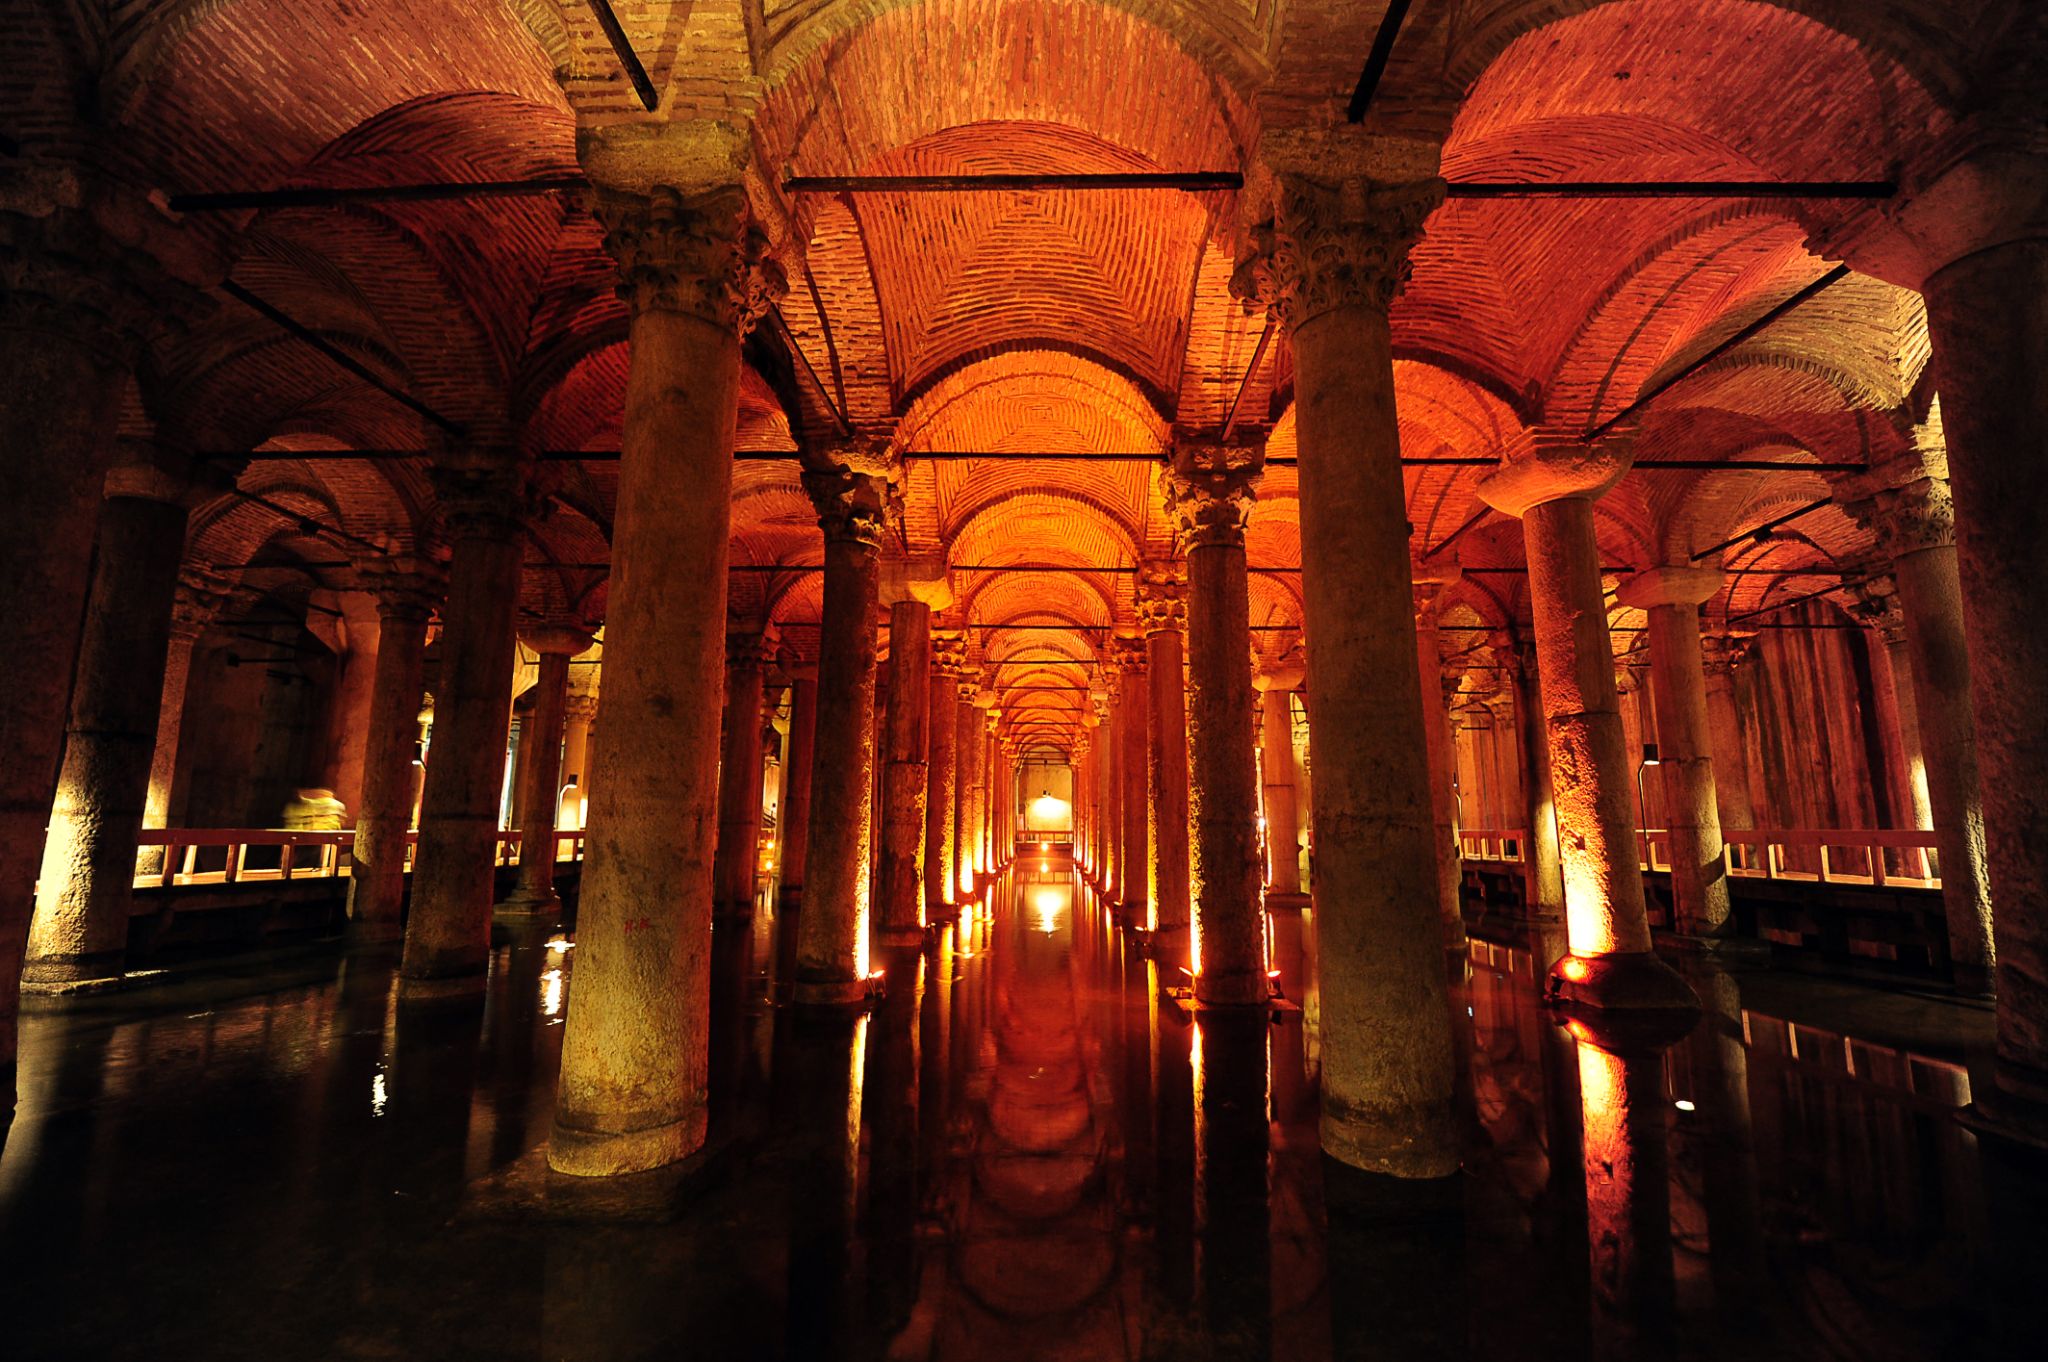 The Basilica Cistern dates back to the 6th century and built by Emperor Justinian I (Credit: Mustafa Ozer, AFP)